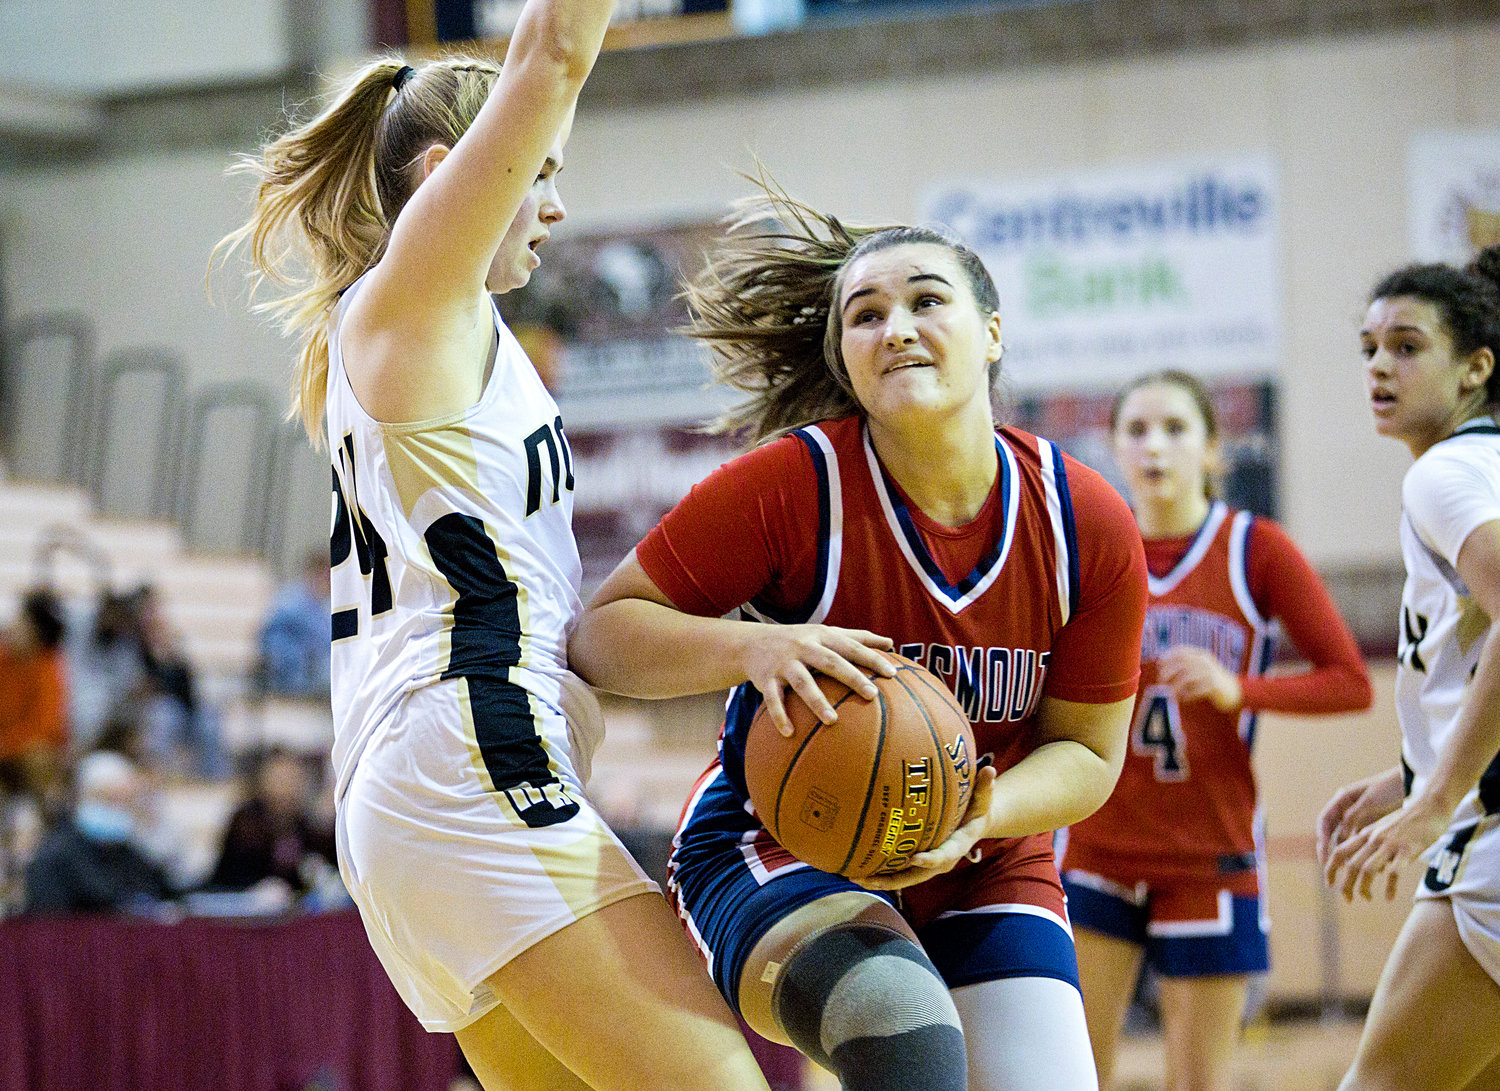 Portsmouth High’s Emily Maiato barrels through the North Kingstown defense to get under the basket during Saturday’s “Elite Eight” game on the road, which the Patriots lost to end their season.